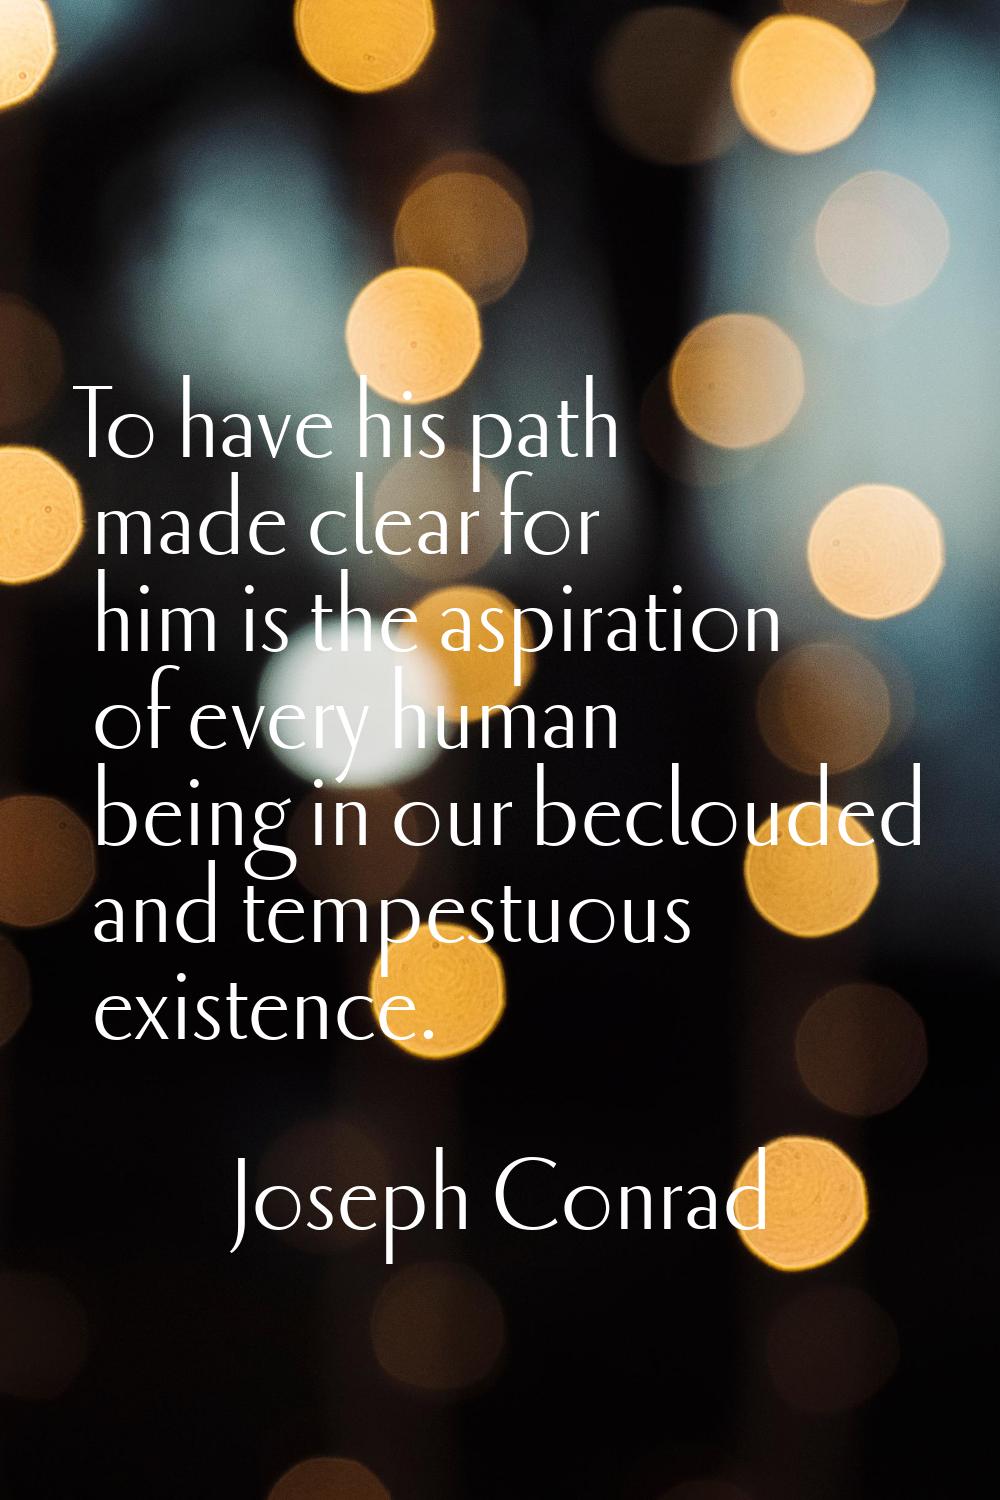 To have his path made clear for him is the aspiration of every human being in our beclouded and tem